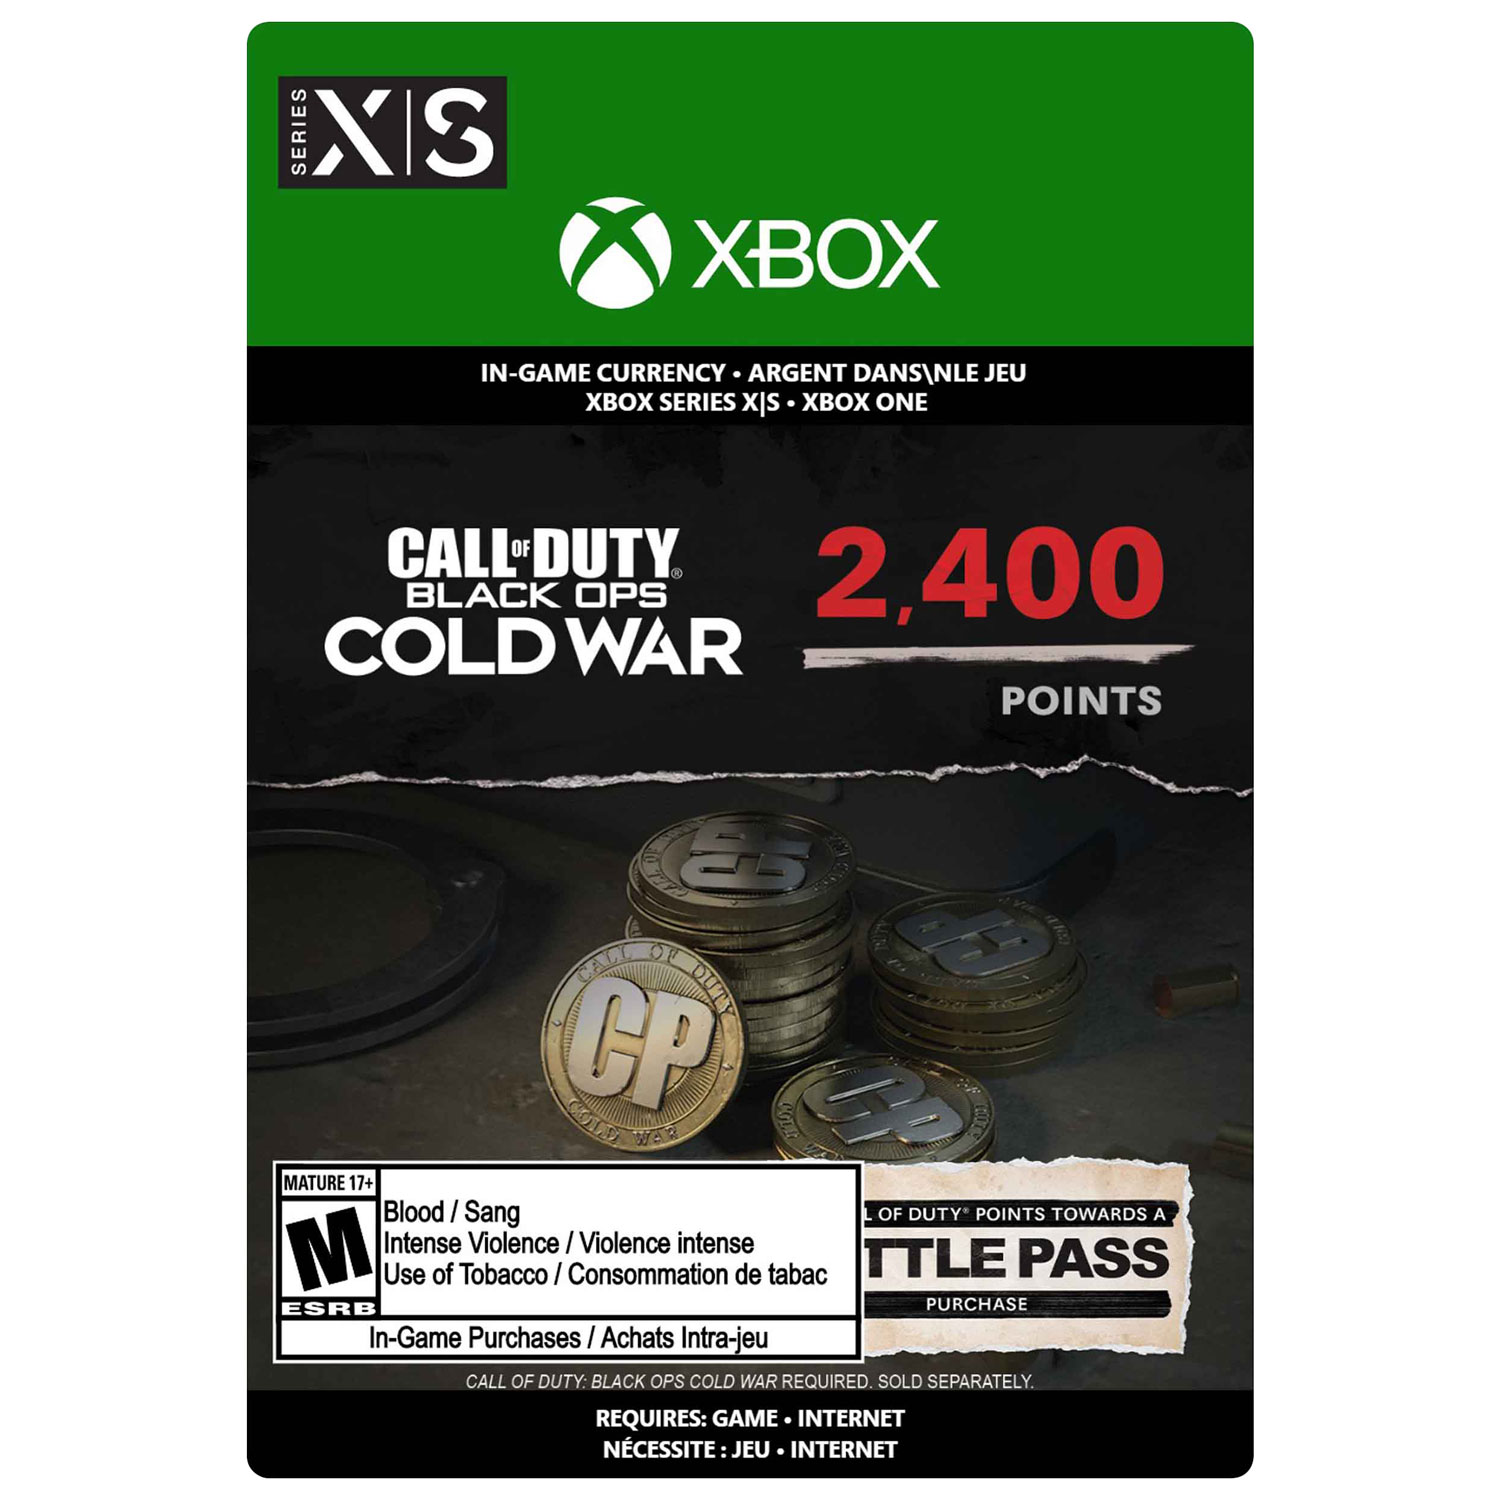 Call of Duty: Black Ops Cold War - 2400 COD Points (Xbox Series X|S / Xbox One) - Digital Download